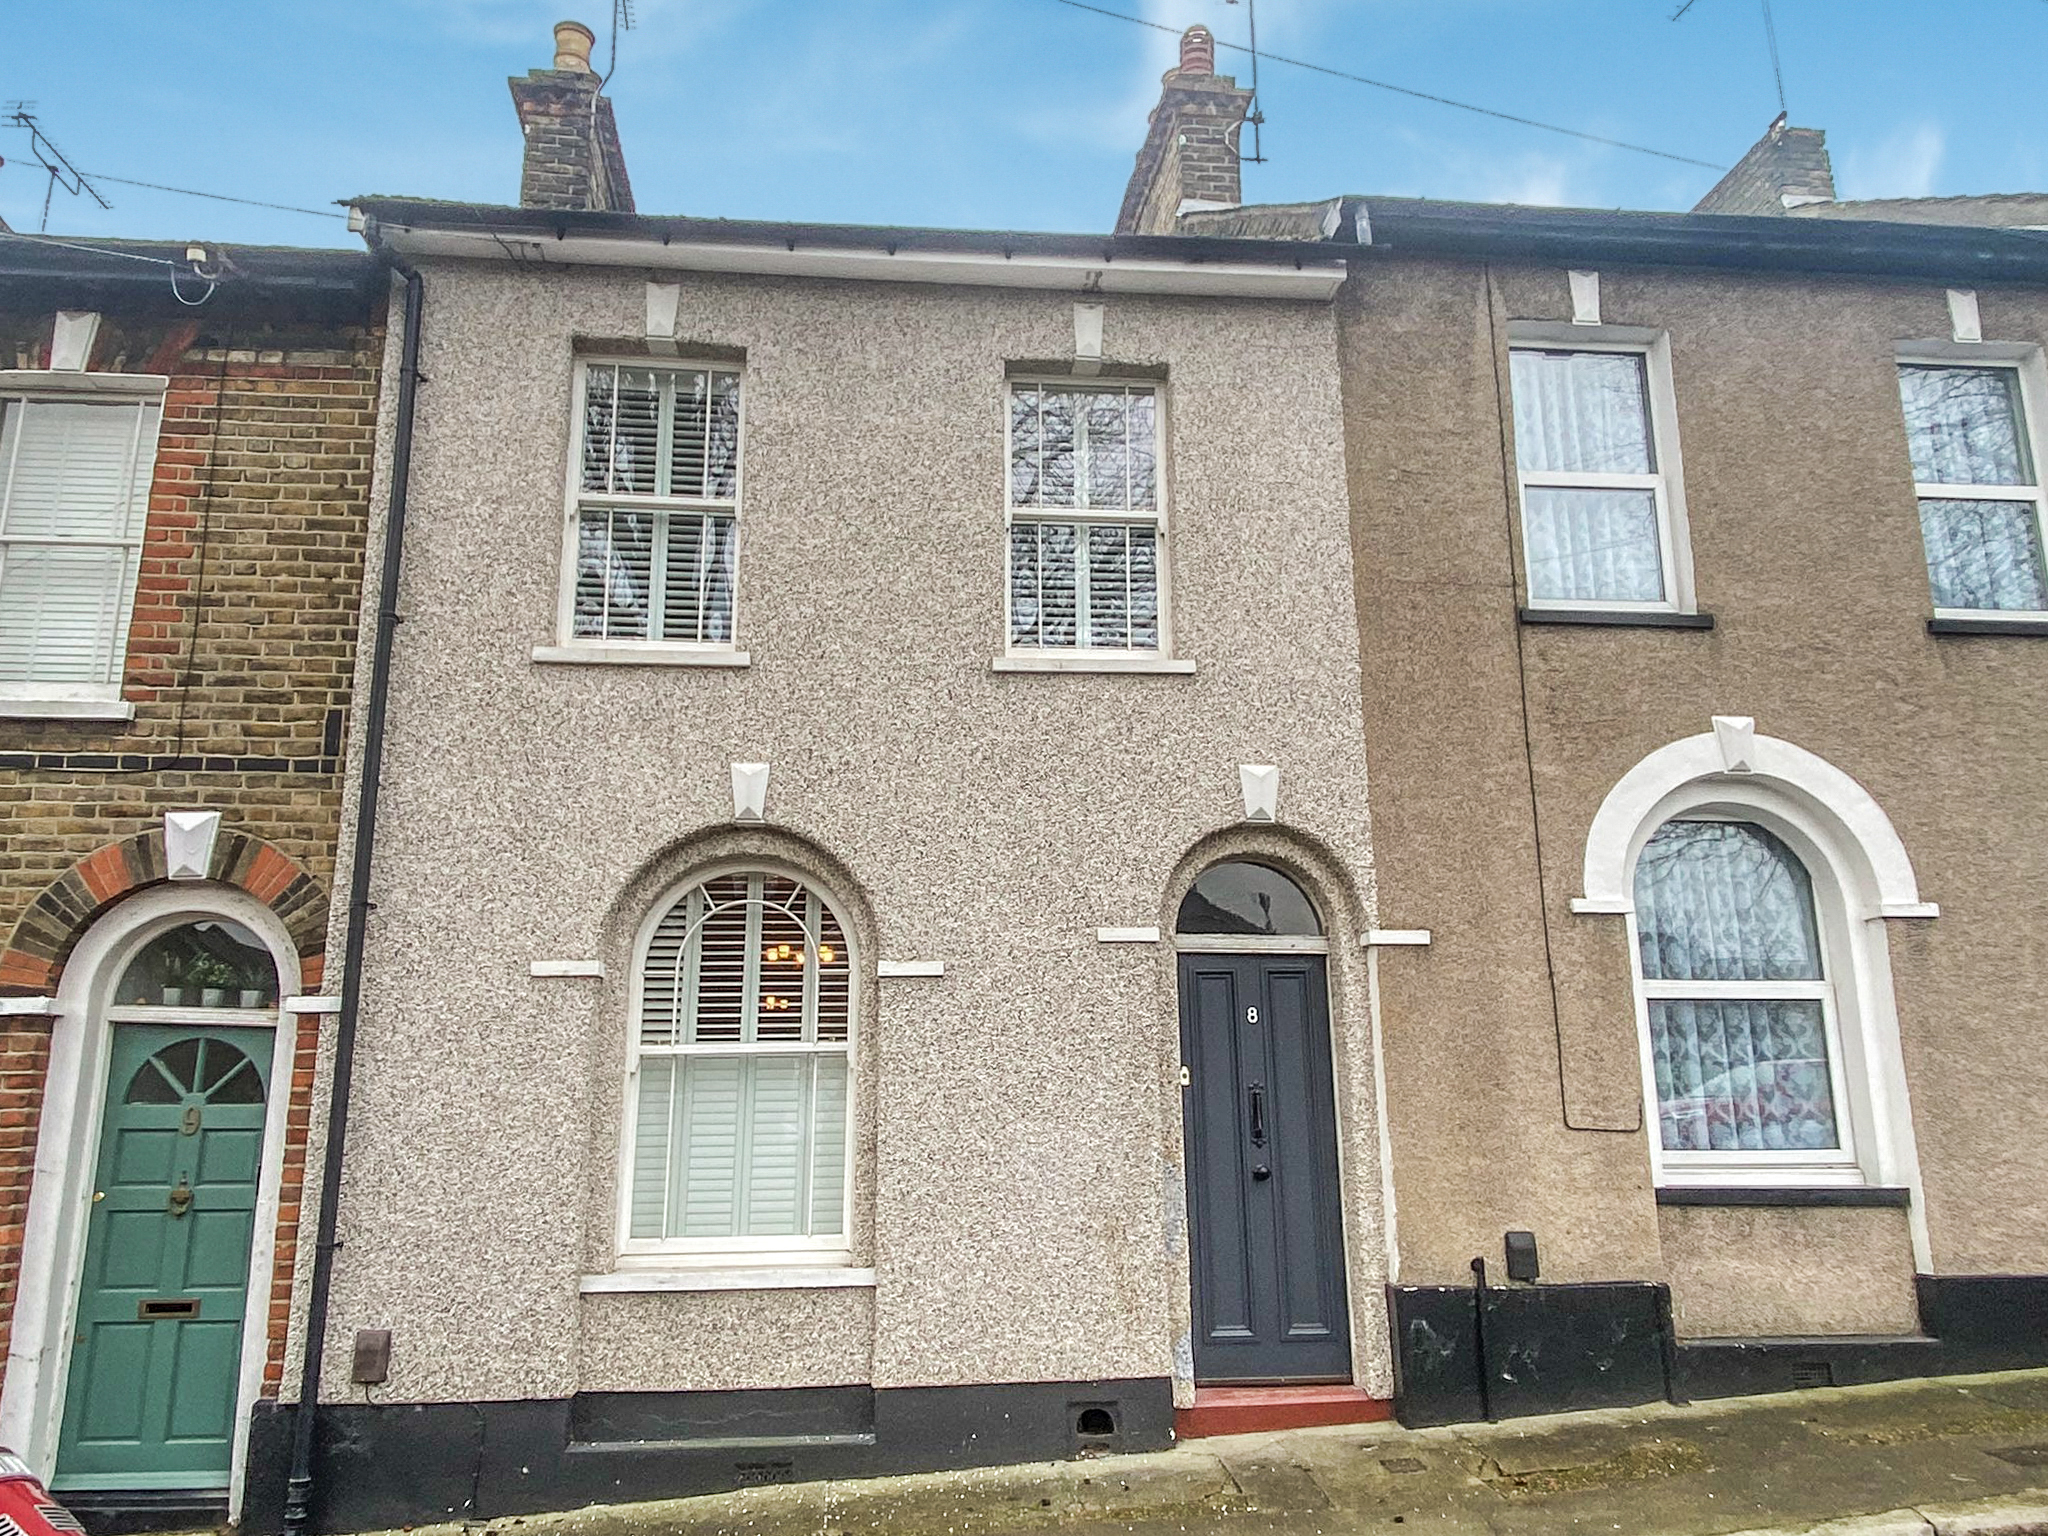 Gravesend rental success - Achieving above the asking price!